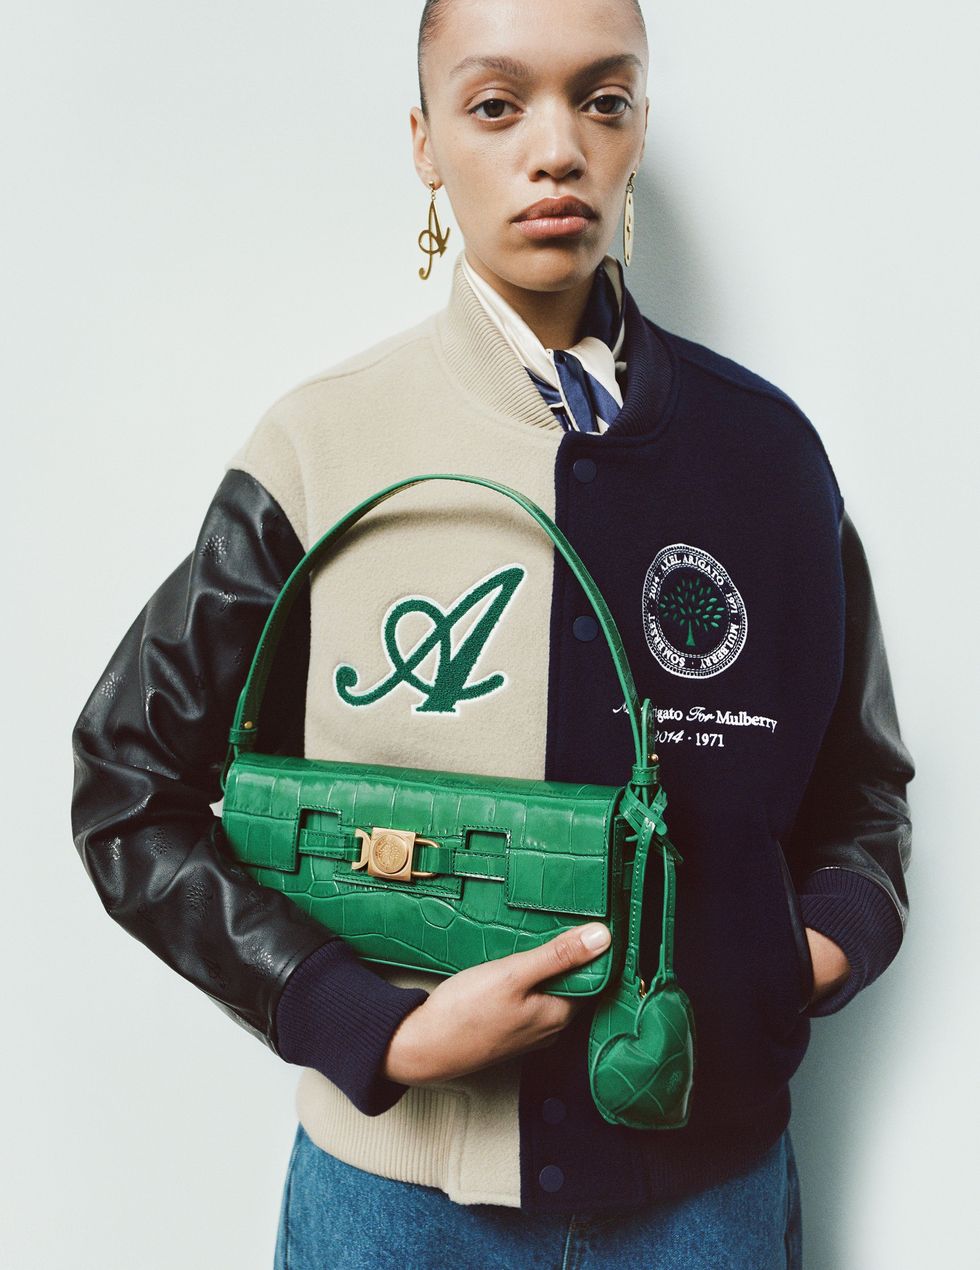 Latest Fashion Brand Updates, Campaigns & Shows  LE MILE Magazine News  Blog - Mulberry x Paul Smith ANTHONY Collection 2023: A British Design  Evolution - LE MILE